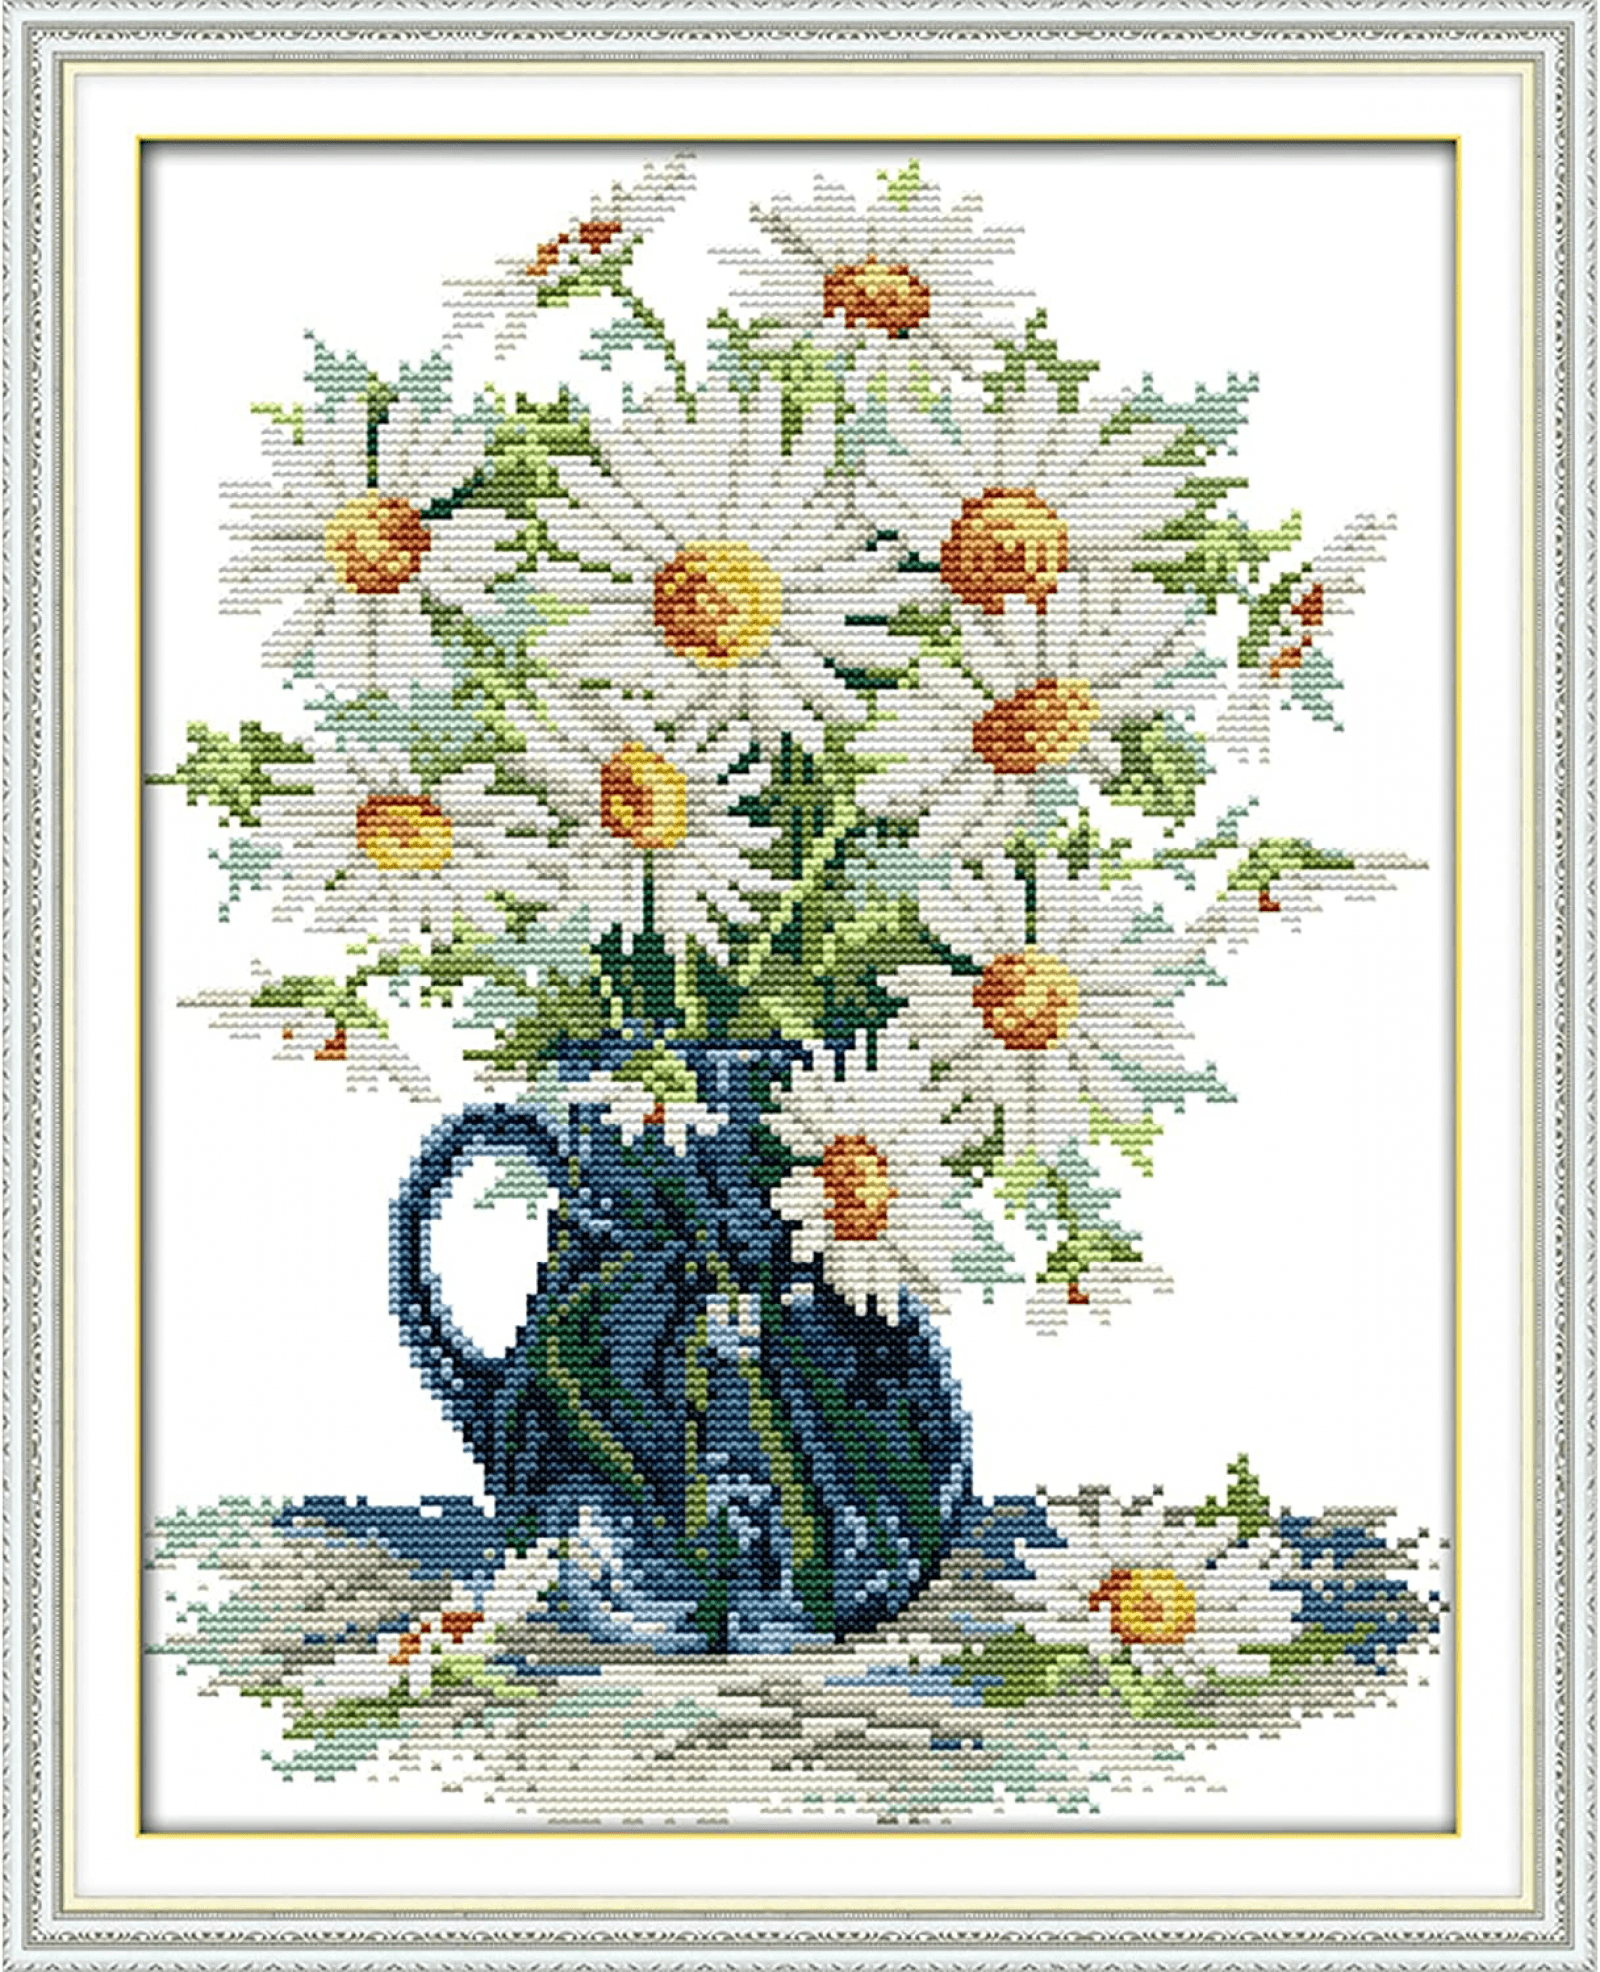 Beginners Cross Stitch Kits Stamped Full Range of Embroidery Kits for  Adults DIY Cross Stitches kit Embroidery Patterns for Needle point kit-Flower  Feast Girl 14.2x15.7 inch 